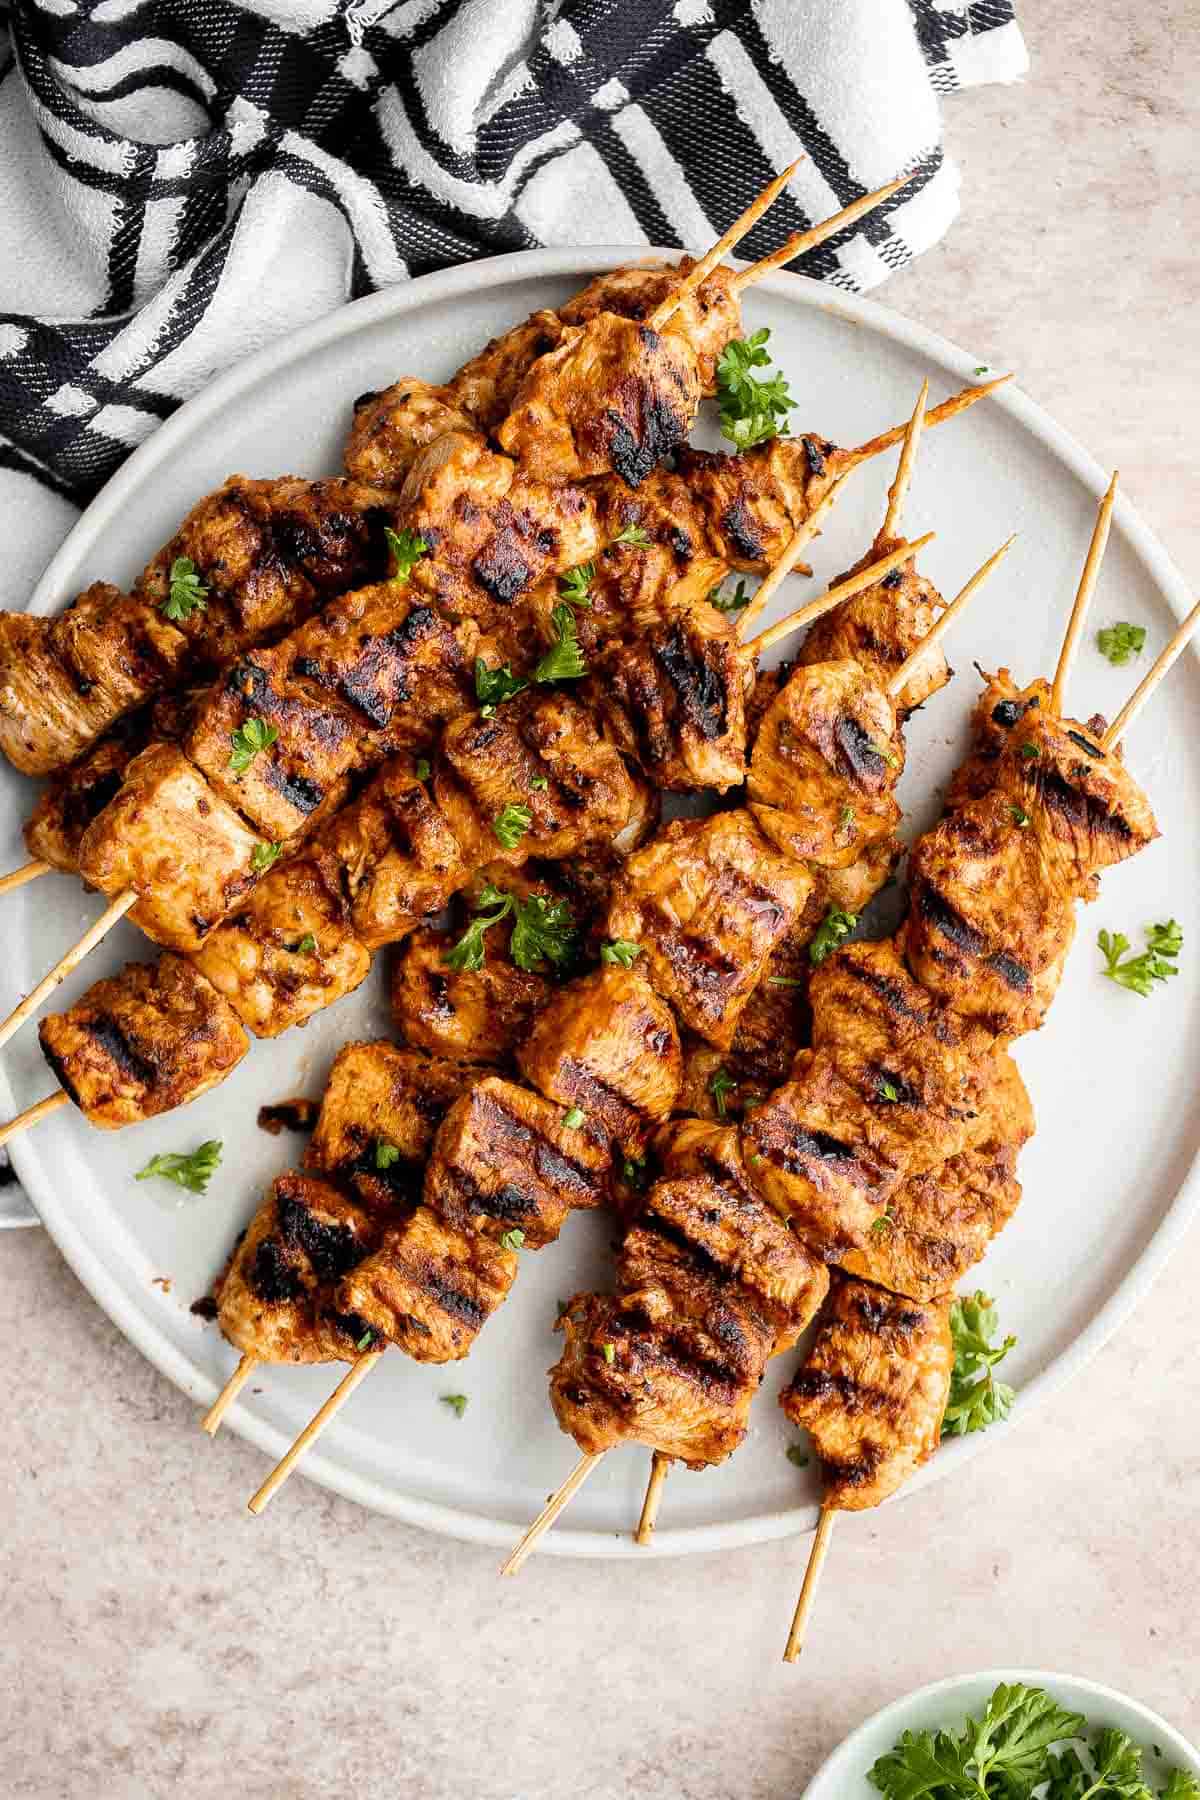 Italian Chicken Skewers are an easy, delicious, and flavorful grilled chicken dinner made with juicy chicken bites smothered in a herby tomato marinade. | aheadofthyme.com